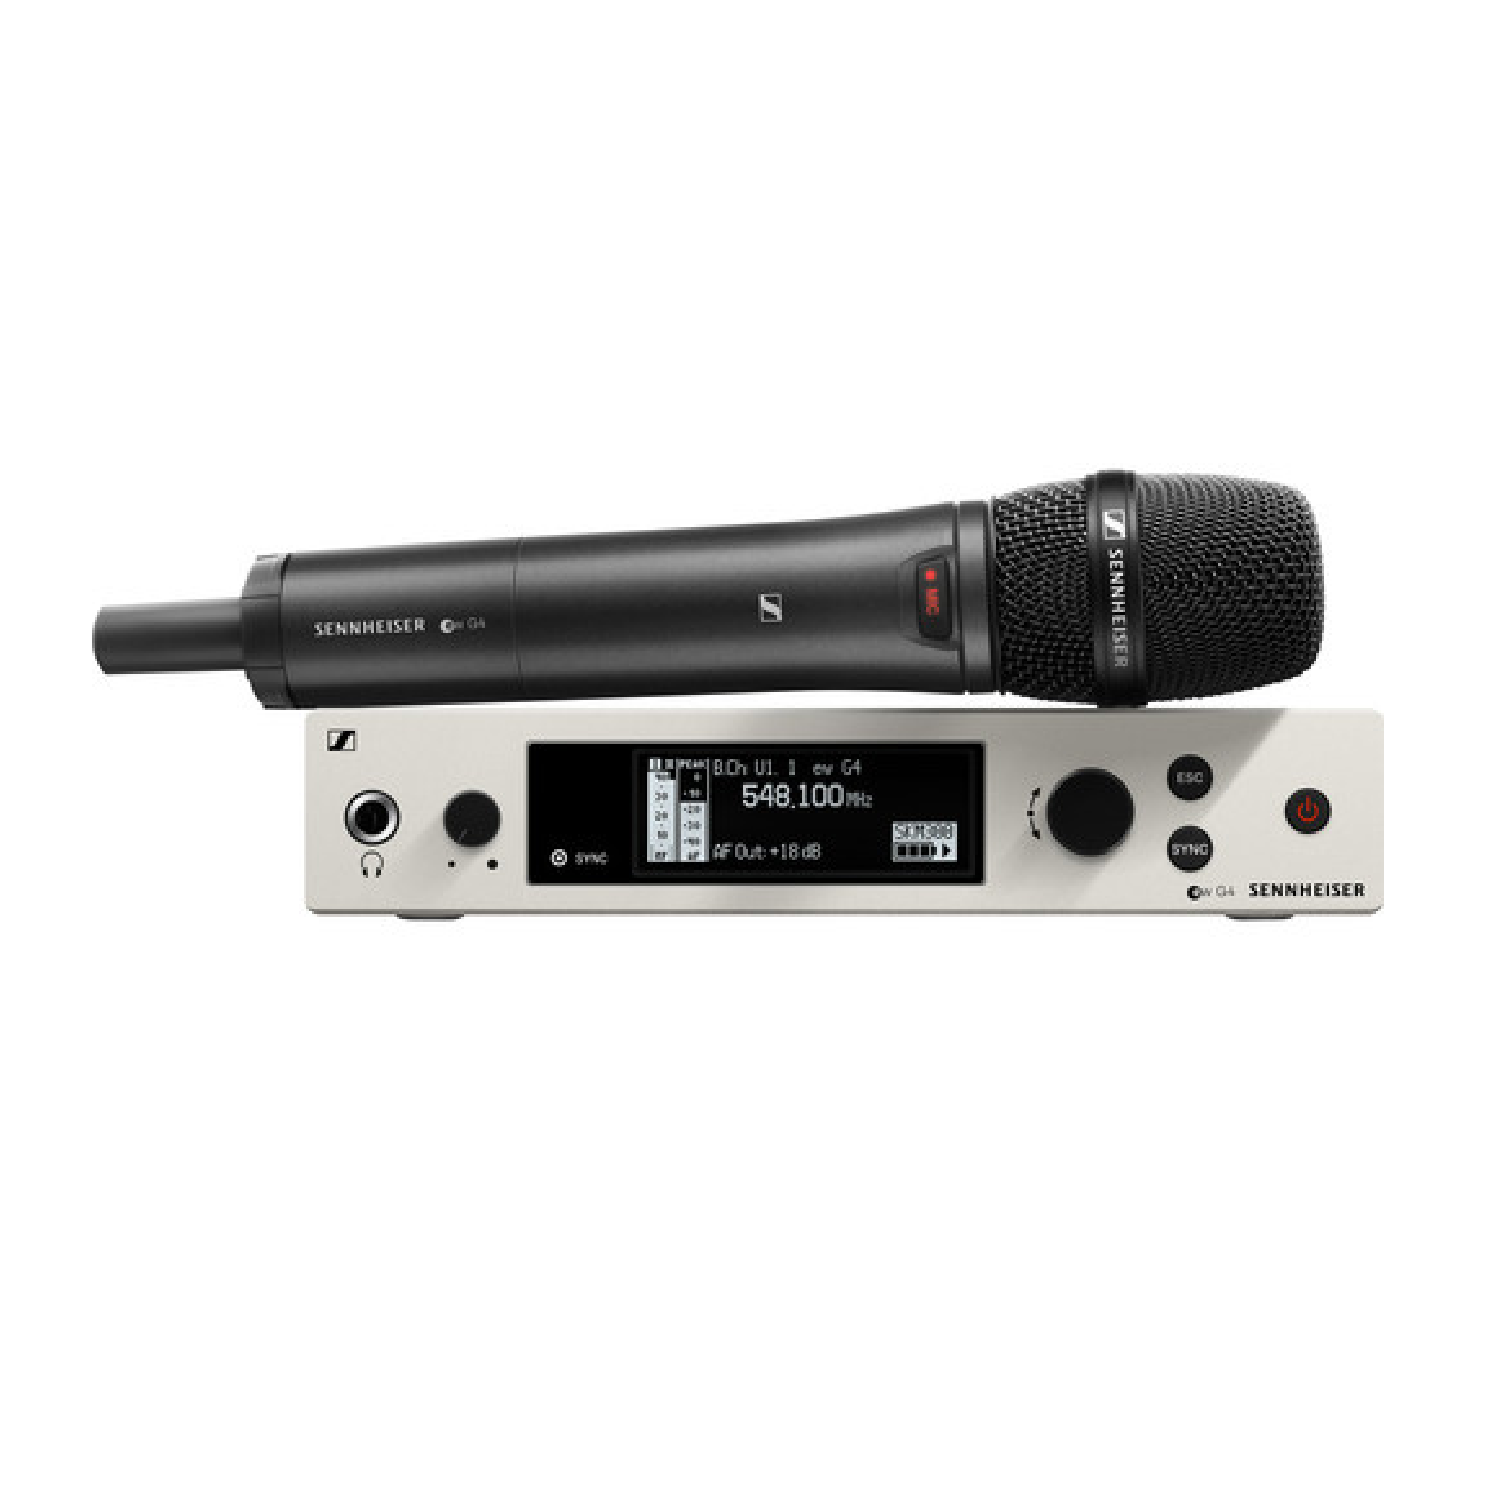 Wireless Handheld Microphone System with MME 865 Capsule - GW1: 558 to 608 MHz   EW 300 G4 865 S Gw sennheiser